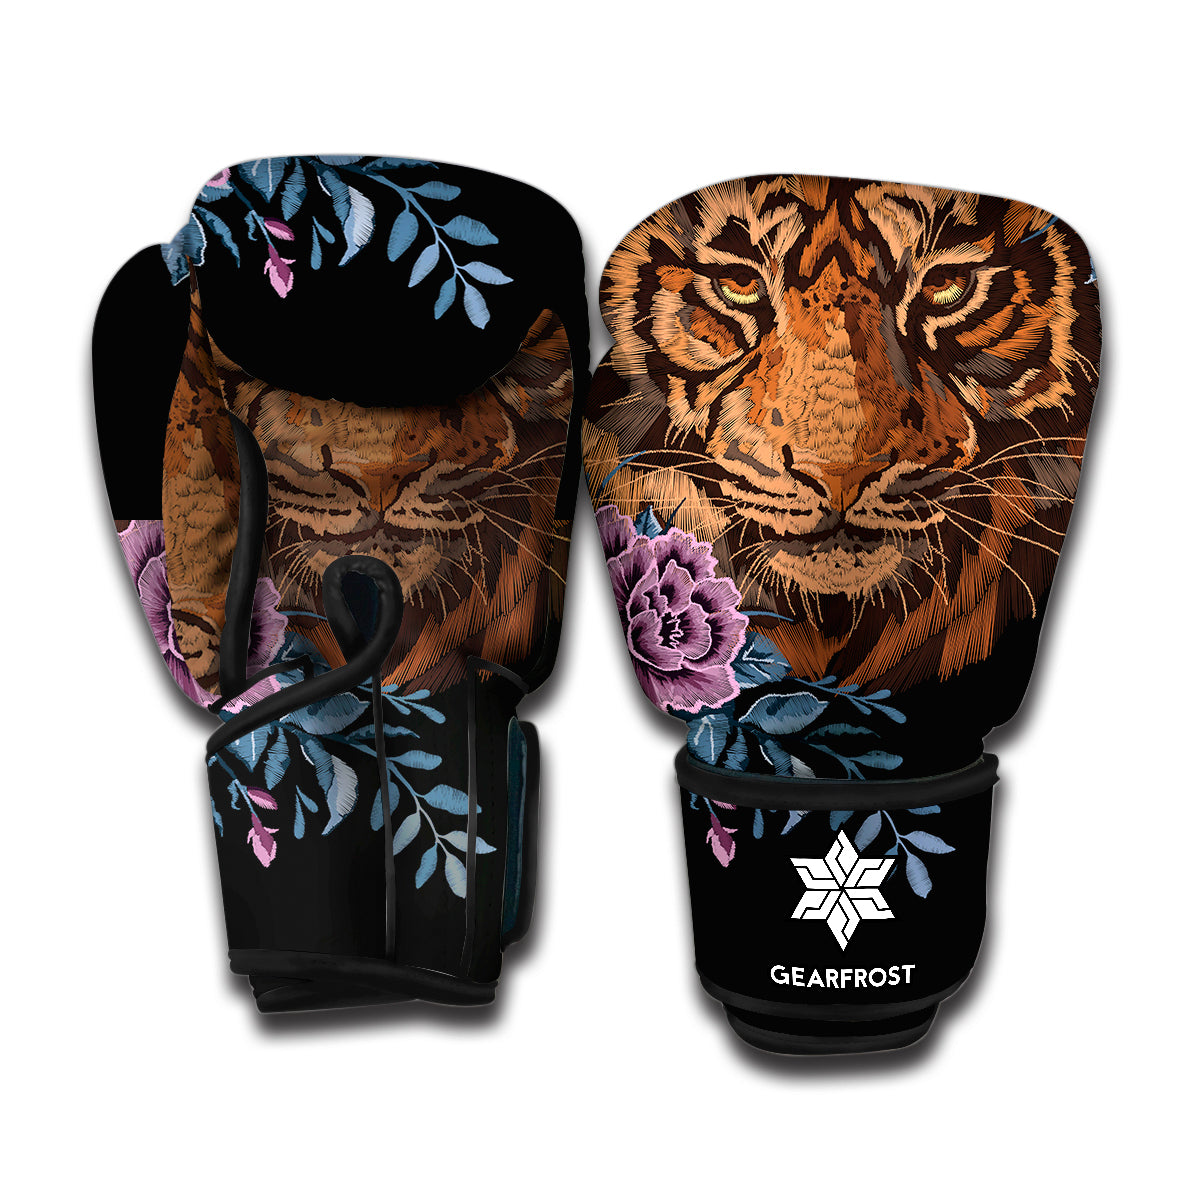 Embroidery Tiger And Flower Print Boxing Gloves